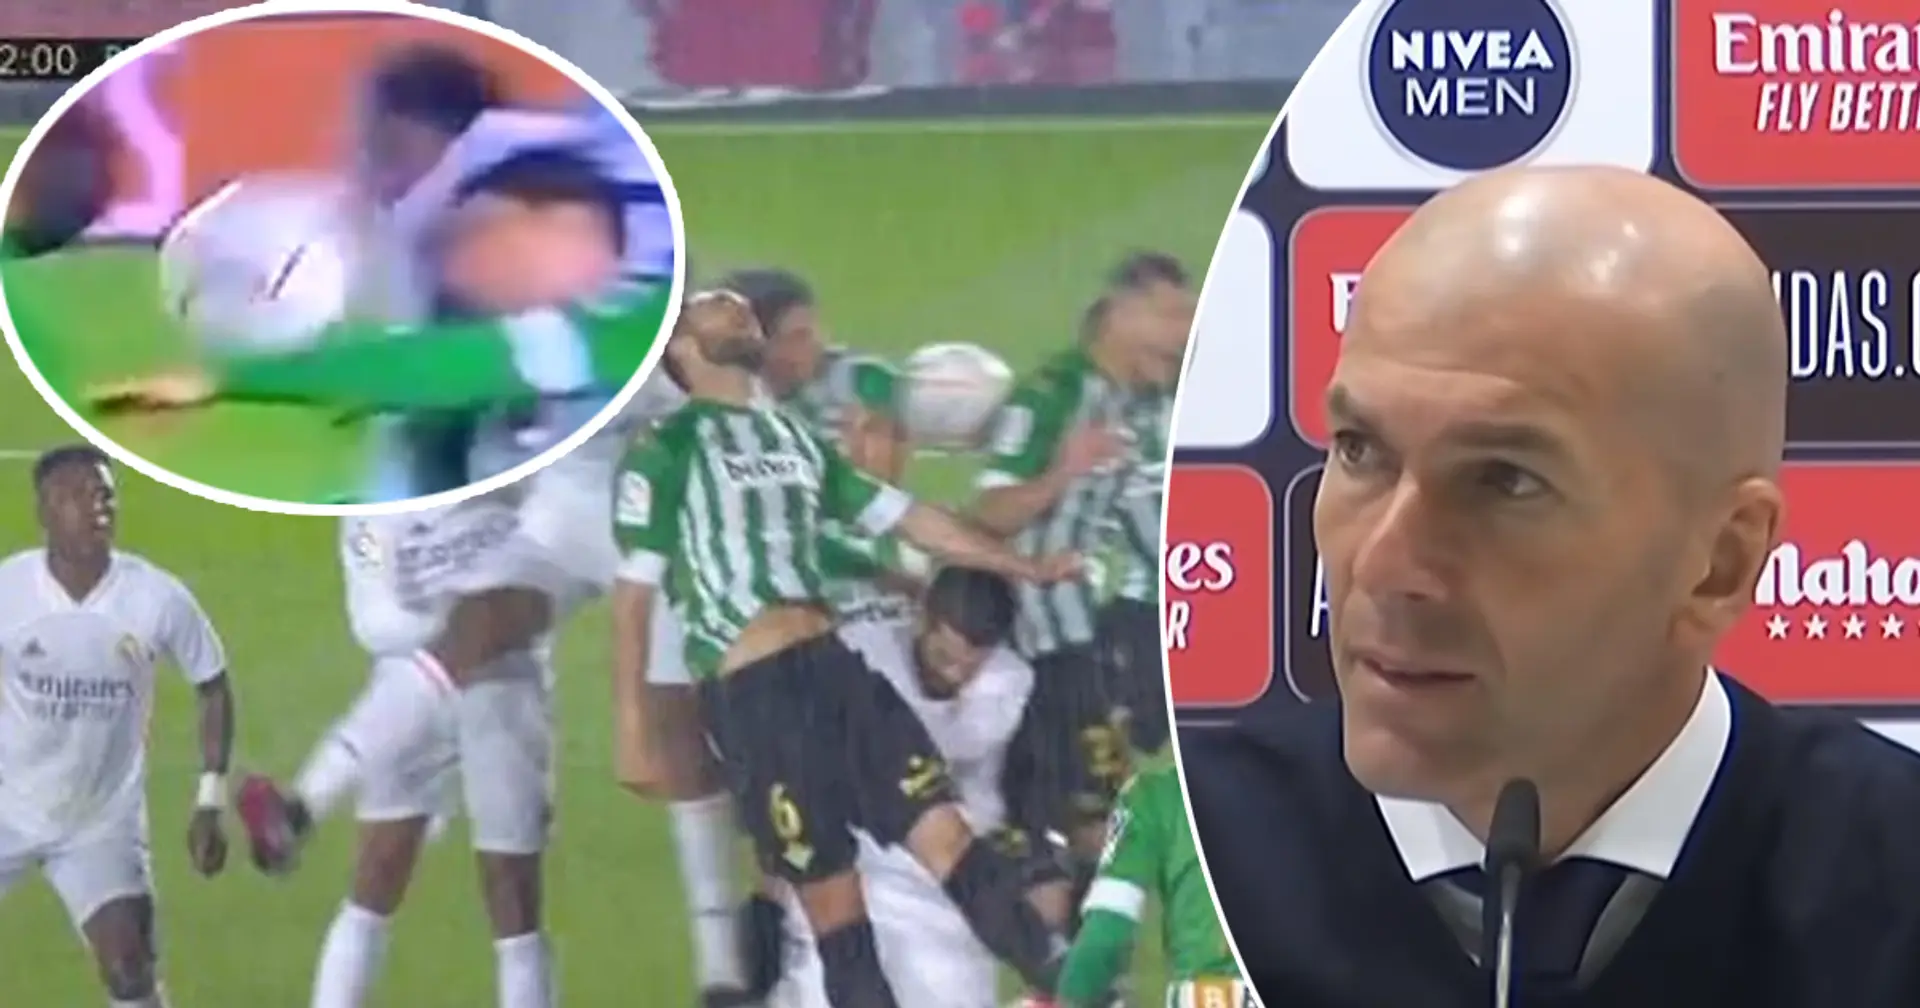 'I don't understand how referee makes his decisions': Zidane baffled as Madrid denied penalty